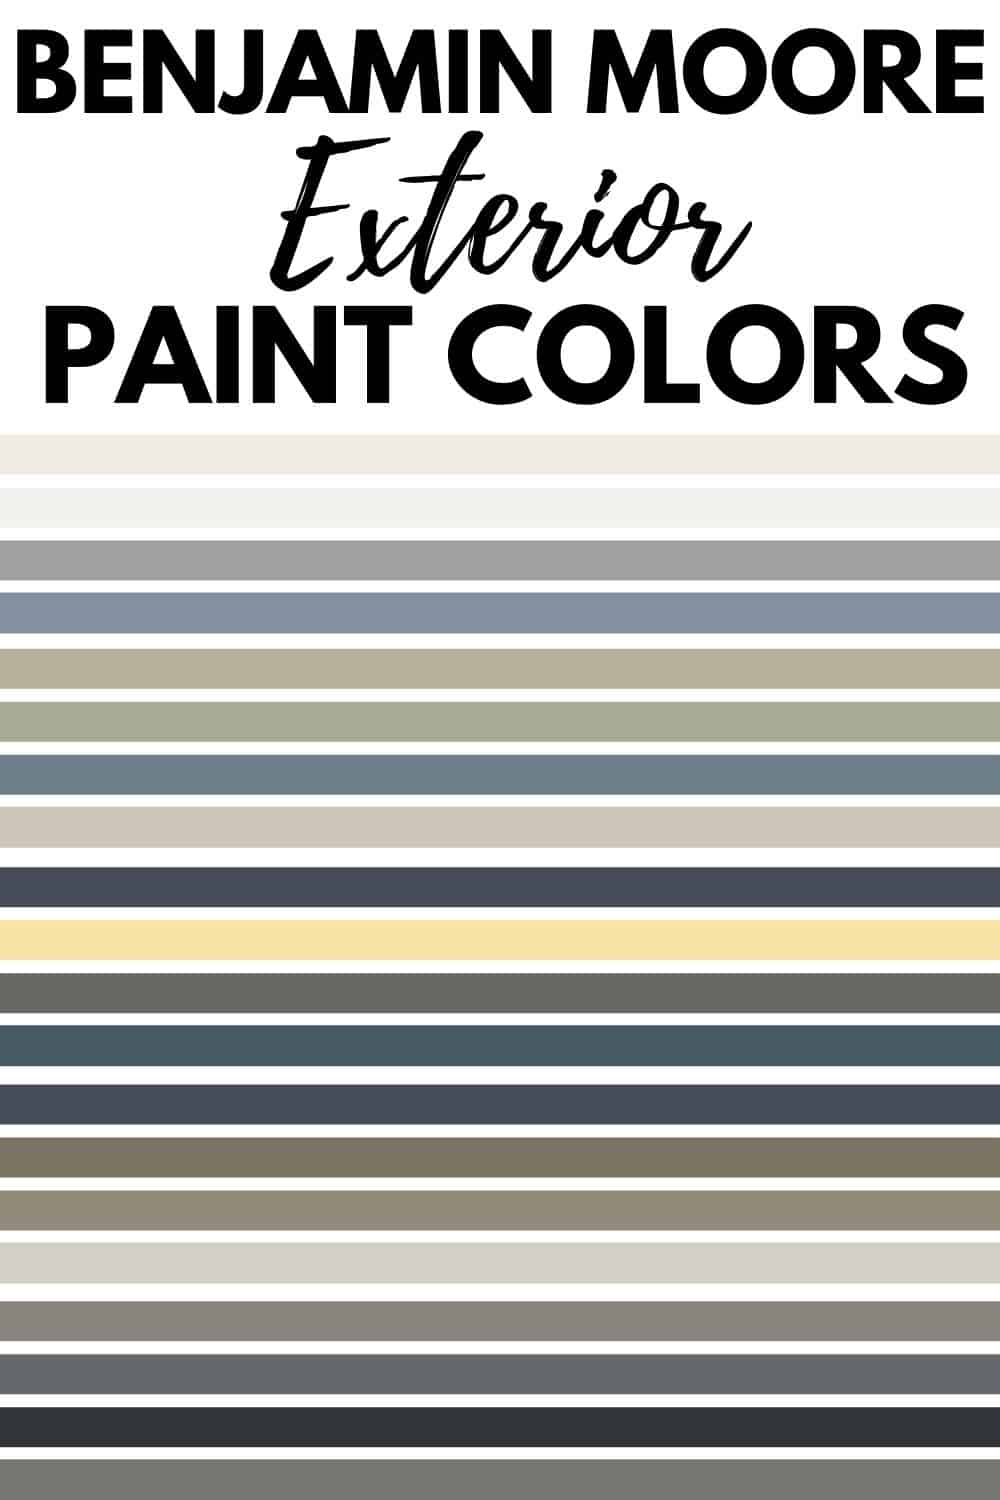 Benjamin Moore Exterior Paint Colors Gray Carlson Whiche